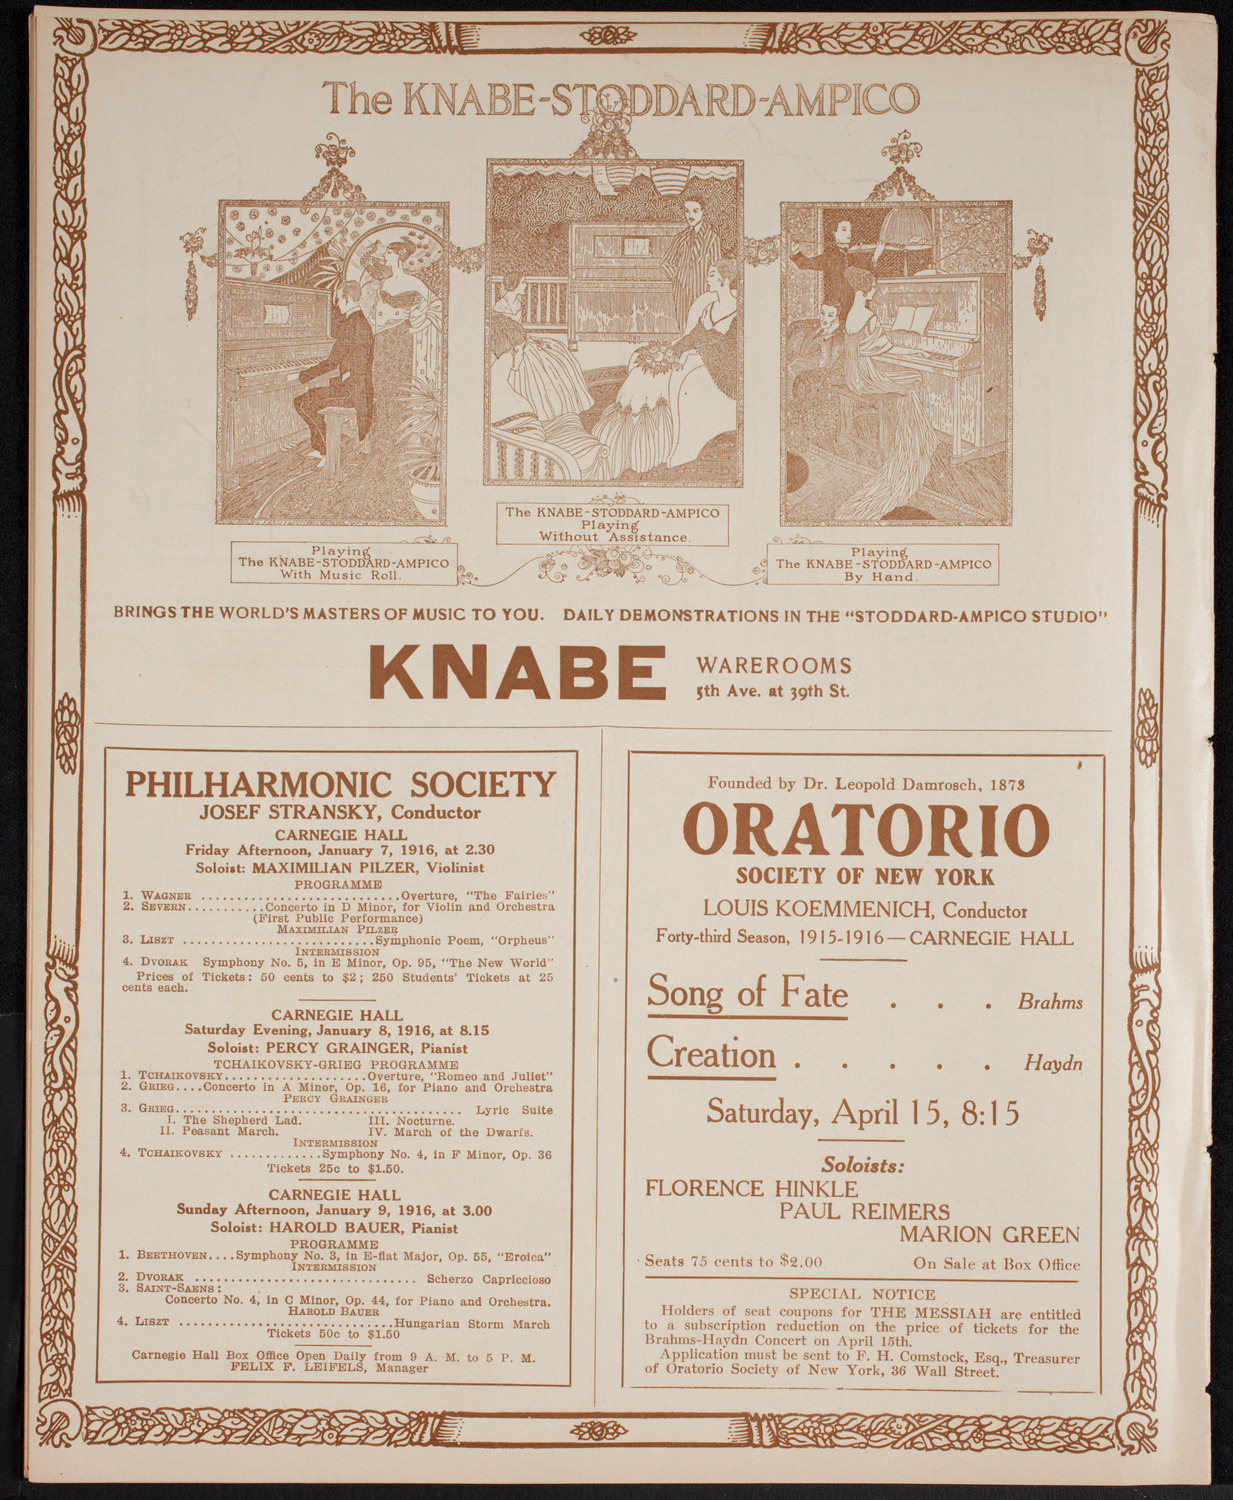 Orchestral Society of New York, January 1, 1916, program page 12